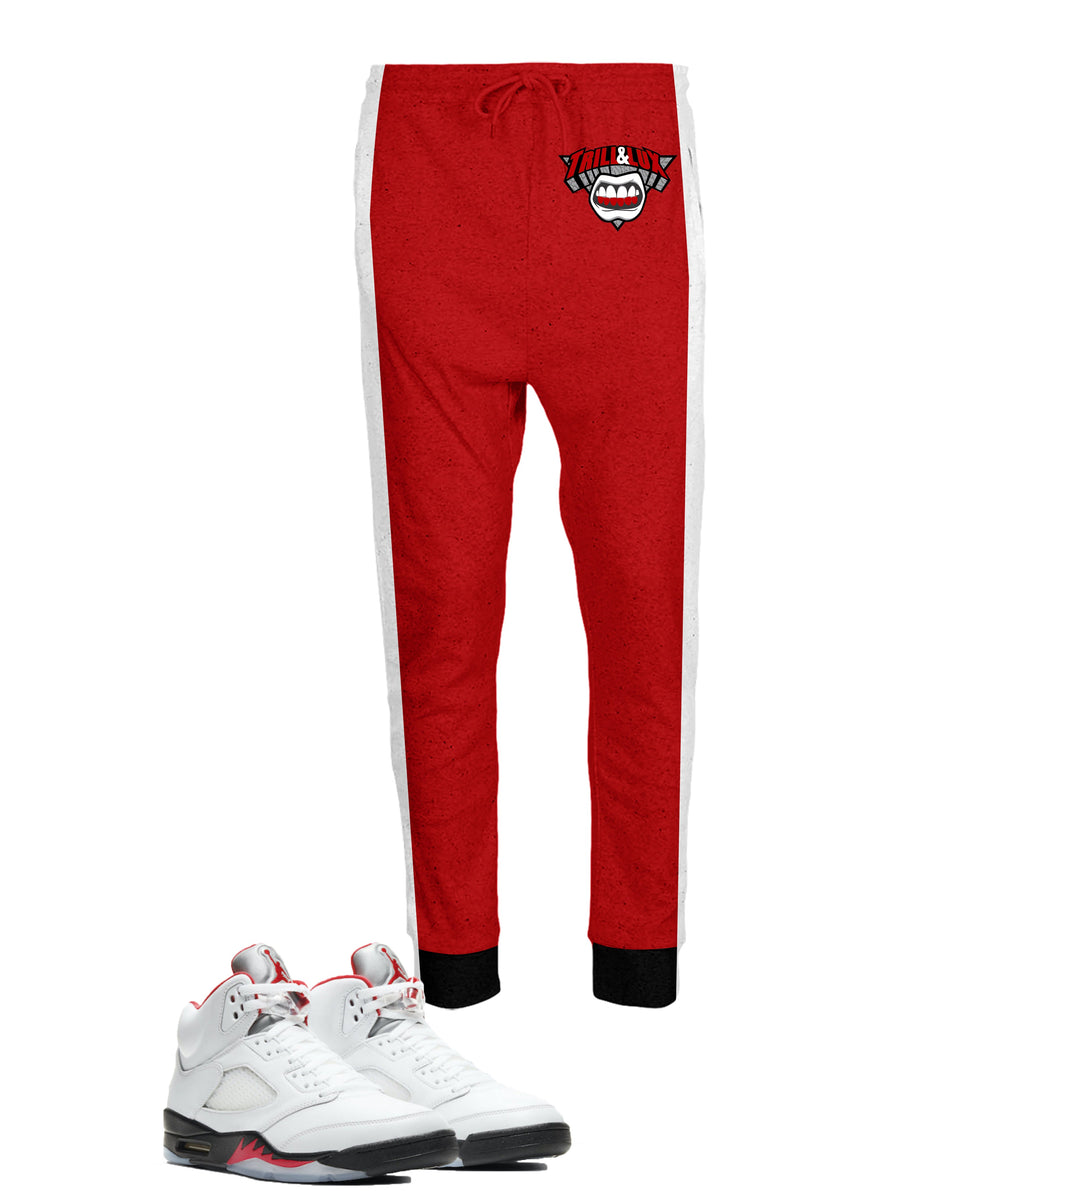 CLEARANCE - Trill & Lux | Jordan 5 Fire Red  Inspired Jogger | 69 Points